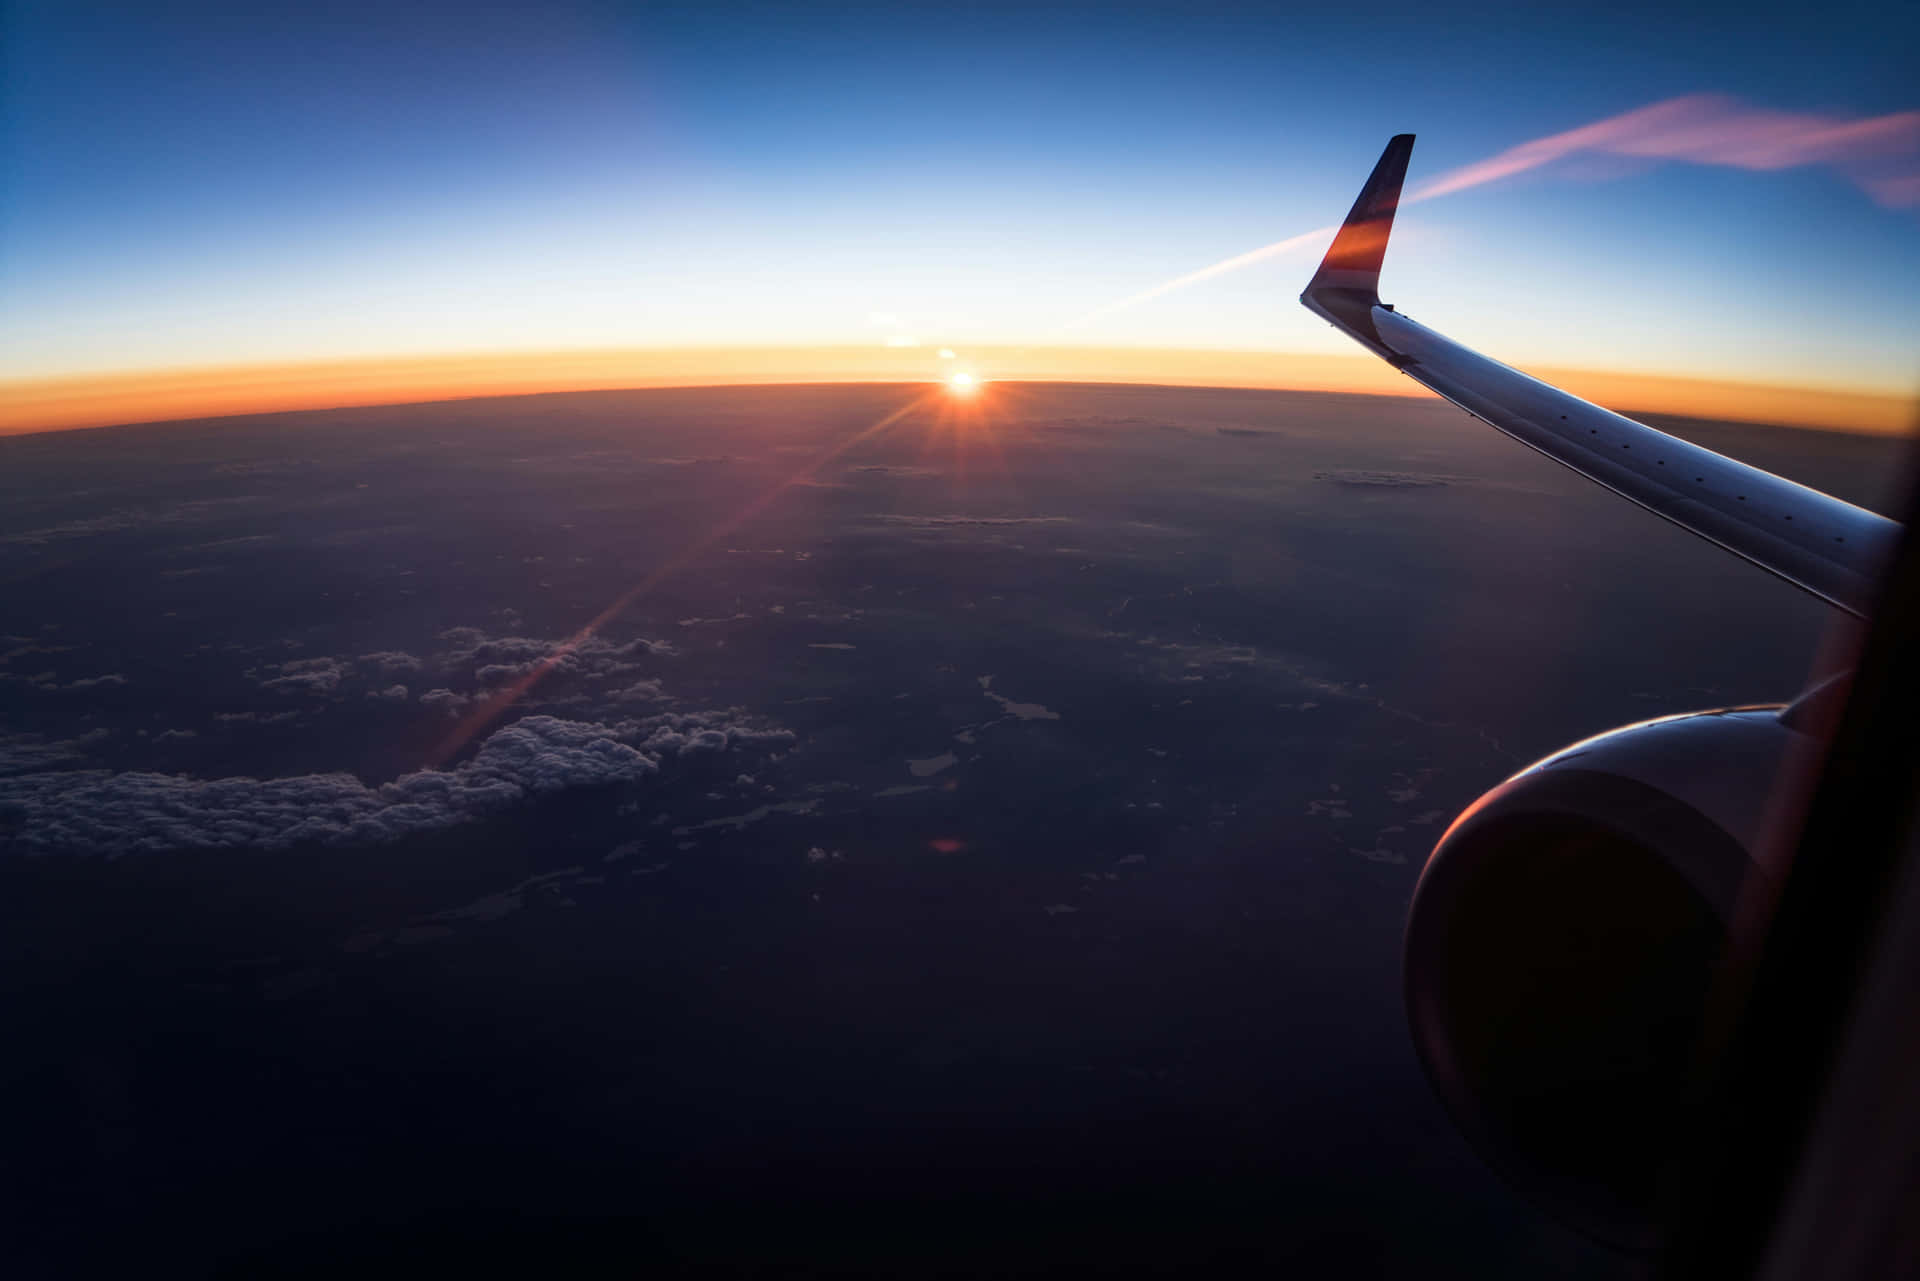 Sunrise Above Clouds Airplane View Wallpaper